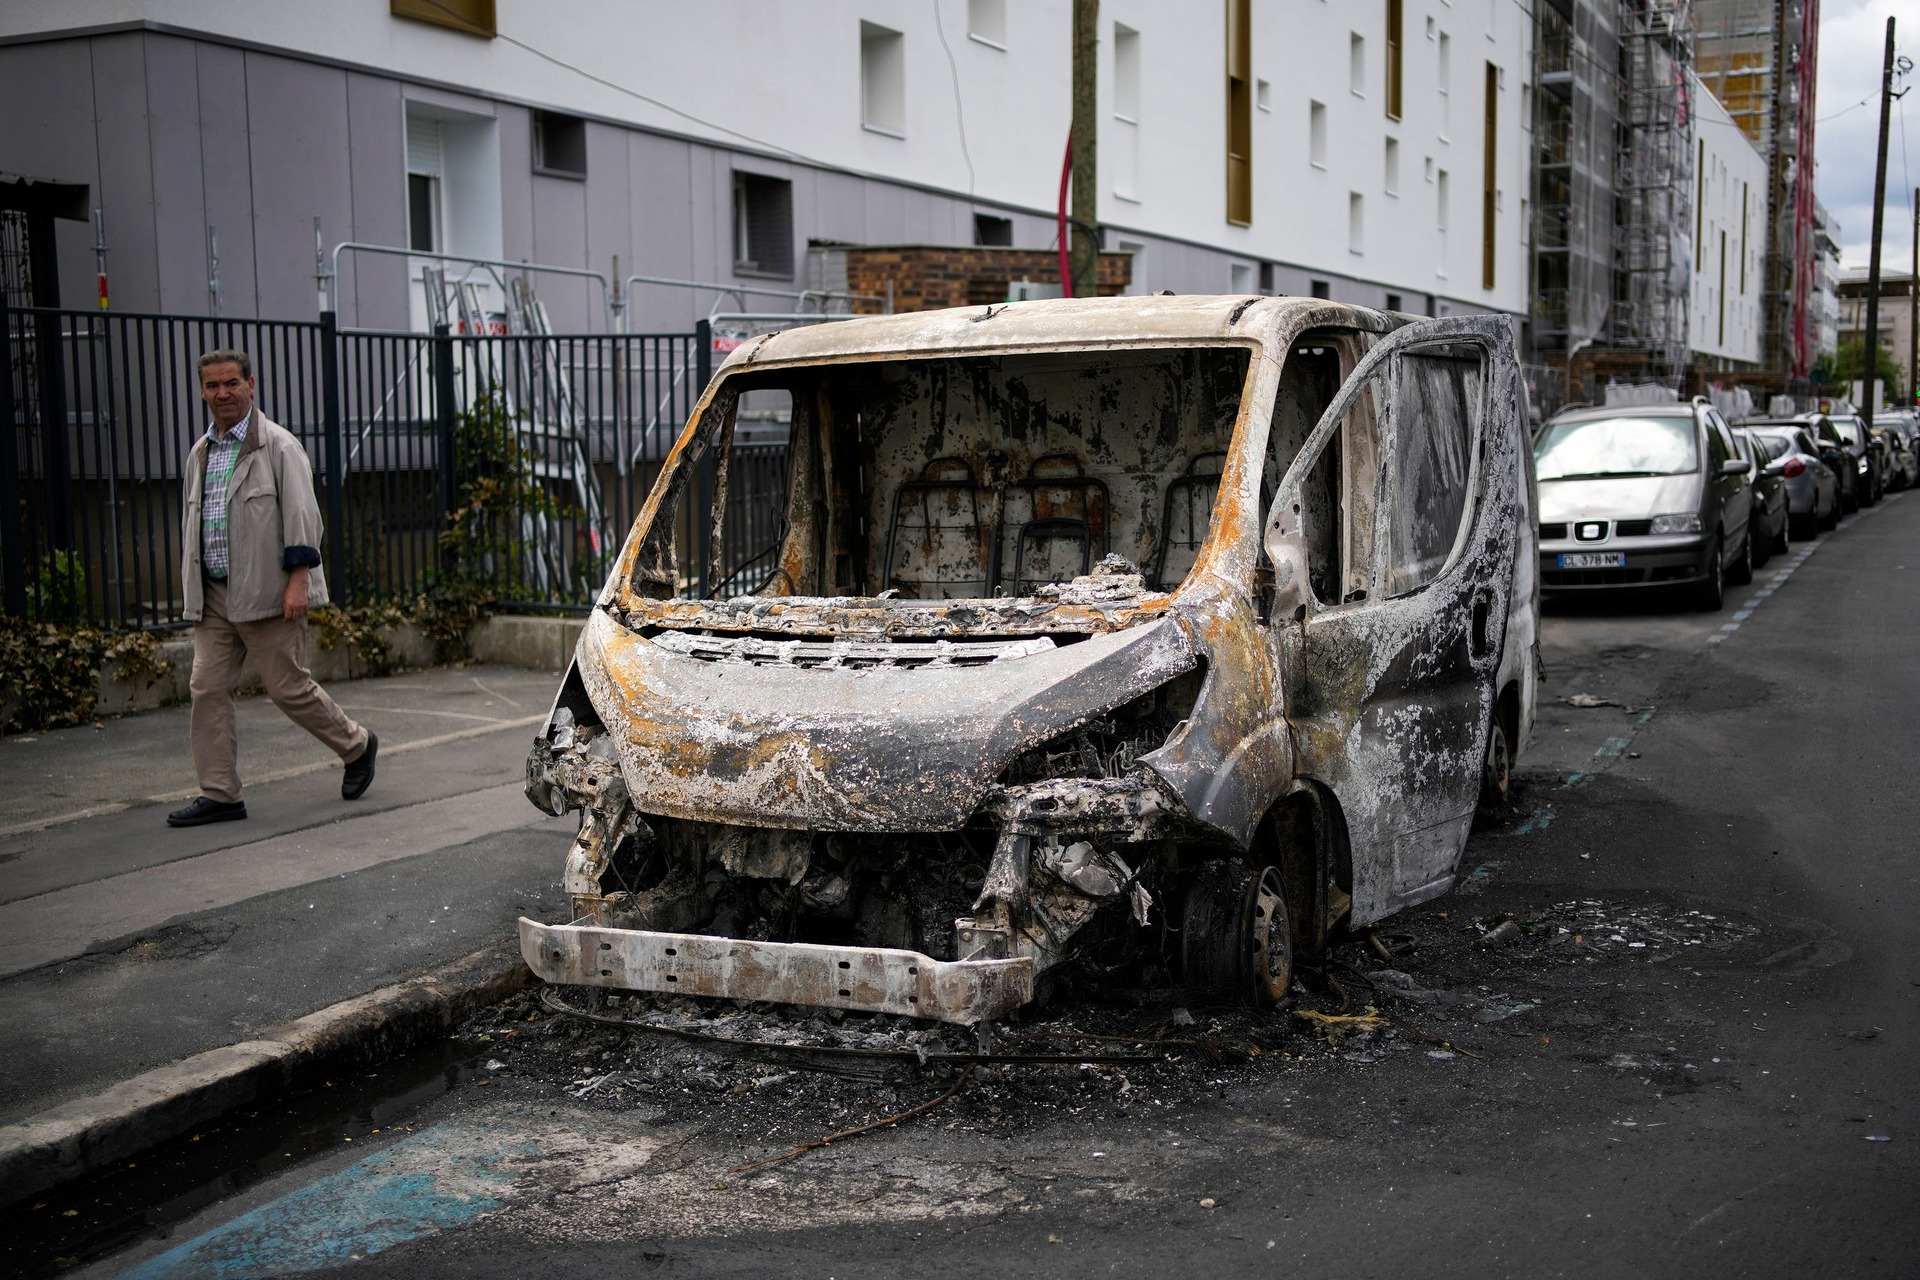 A man walks past a burned van in the aftermath of protests in Colombes, outside Paris.